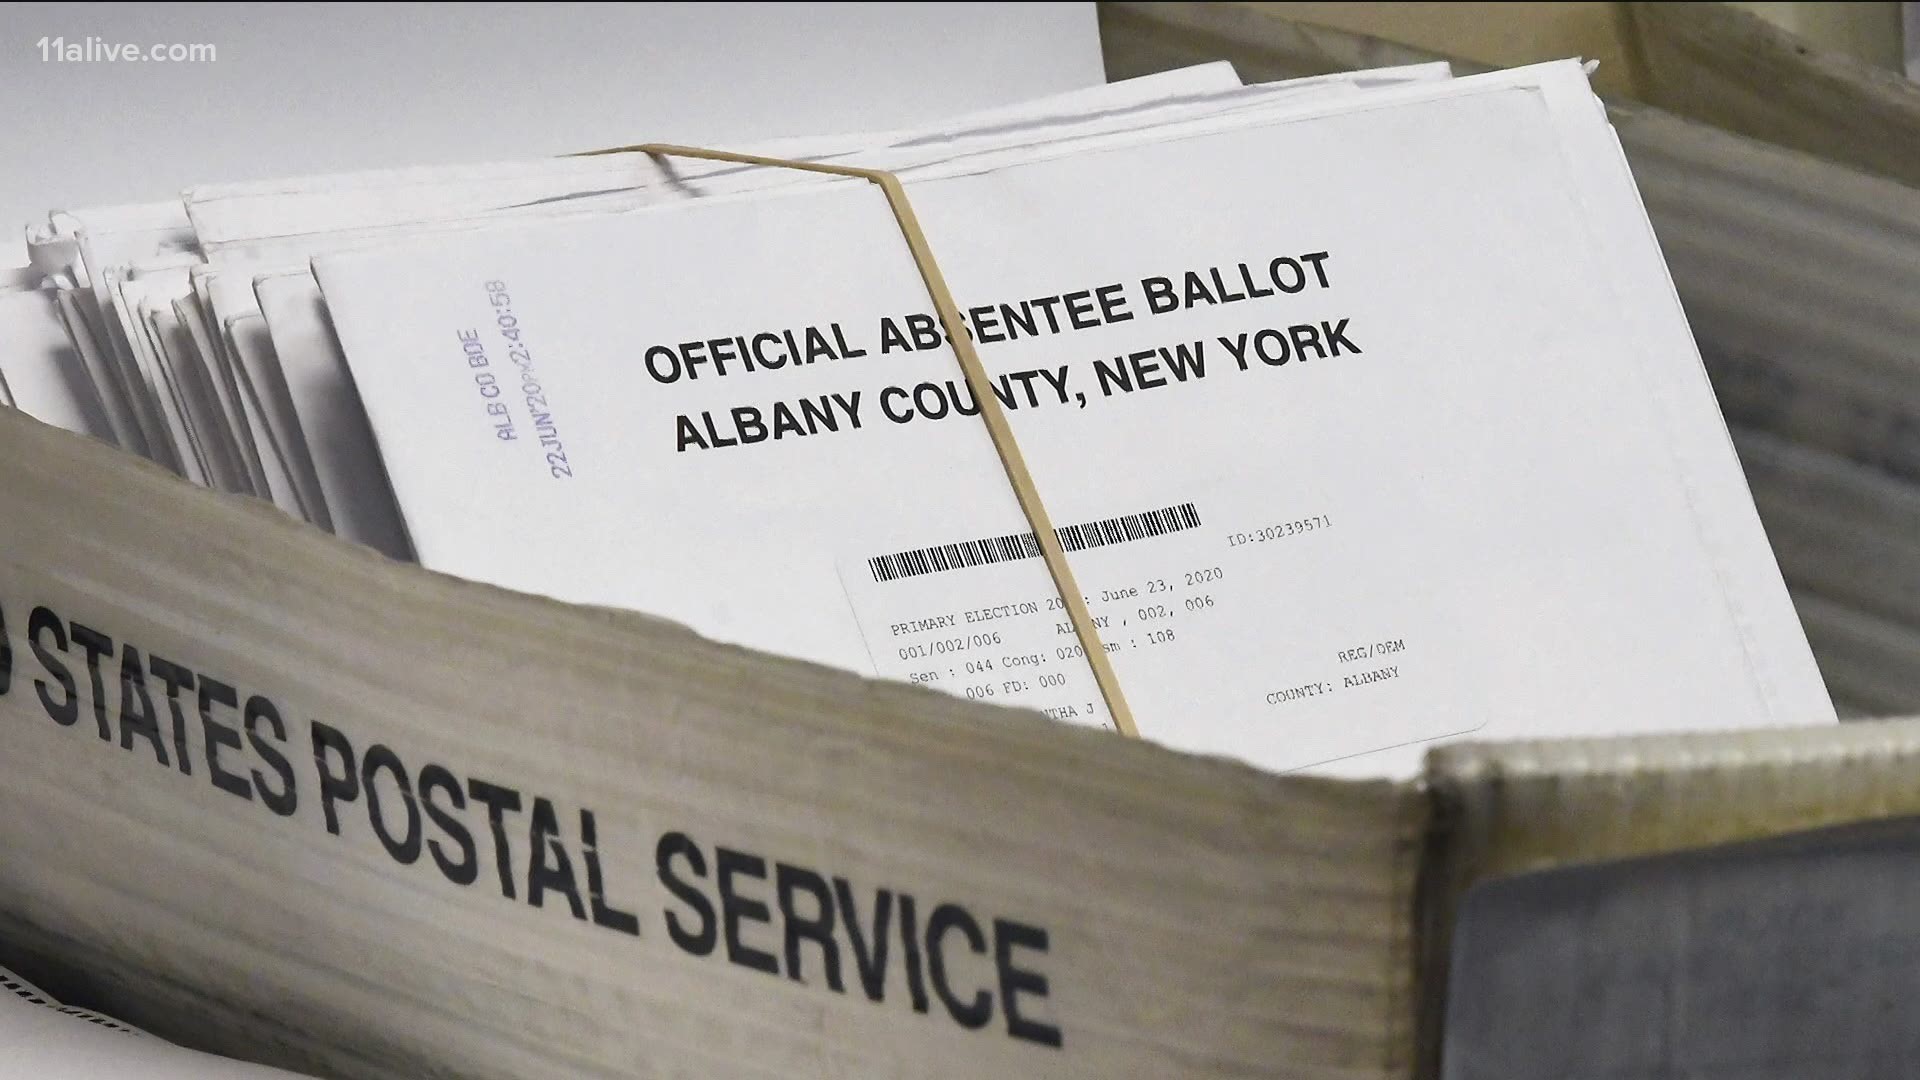 In North Carolina, voters can mail in absentee ballots to vote in the 2020 election.